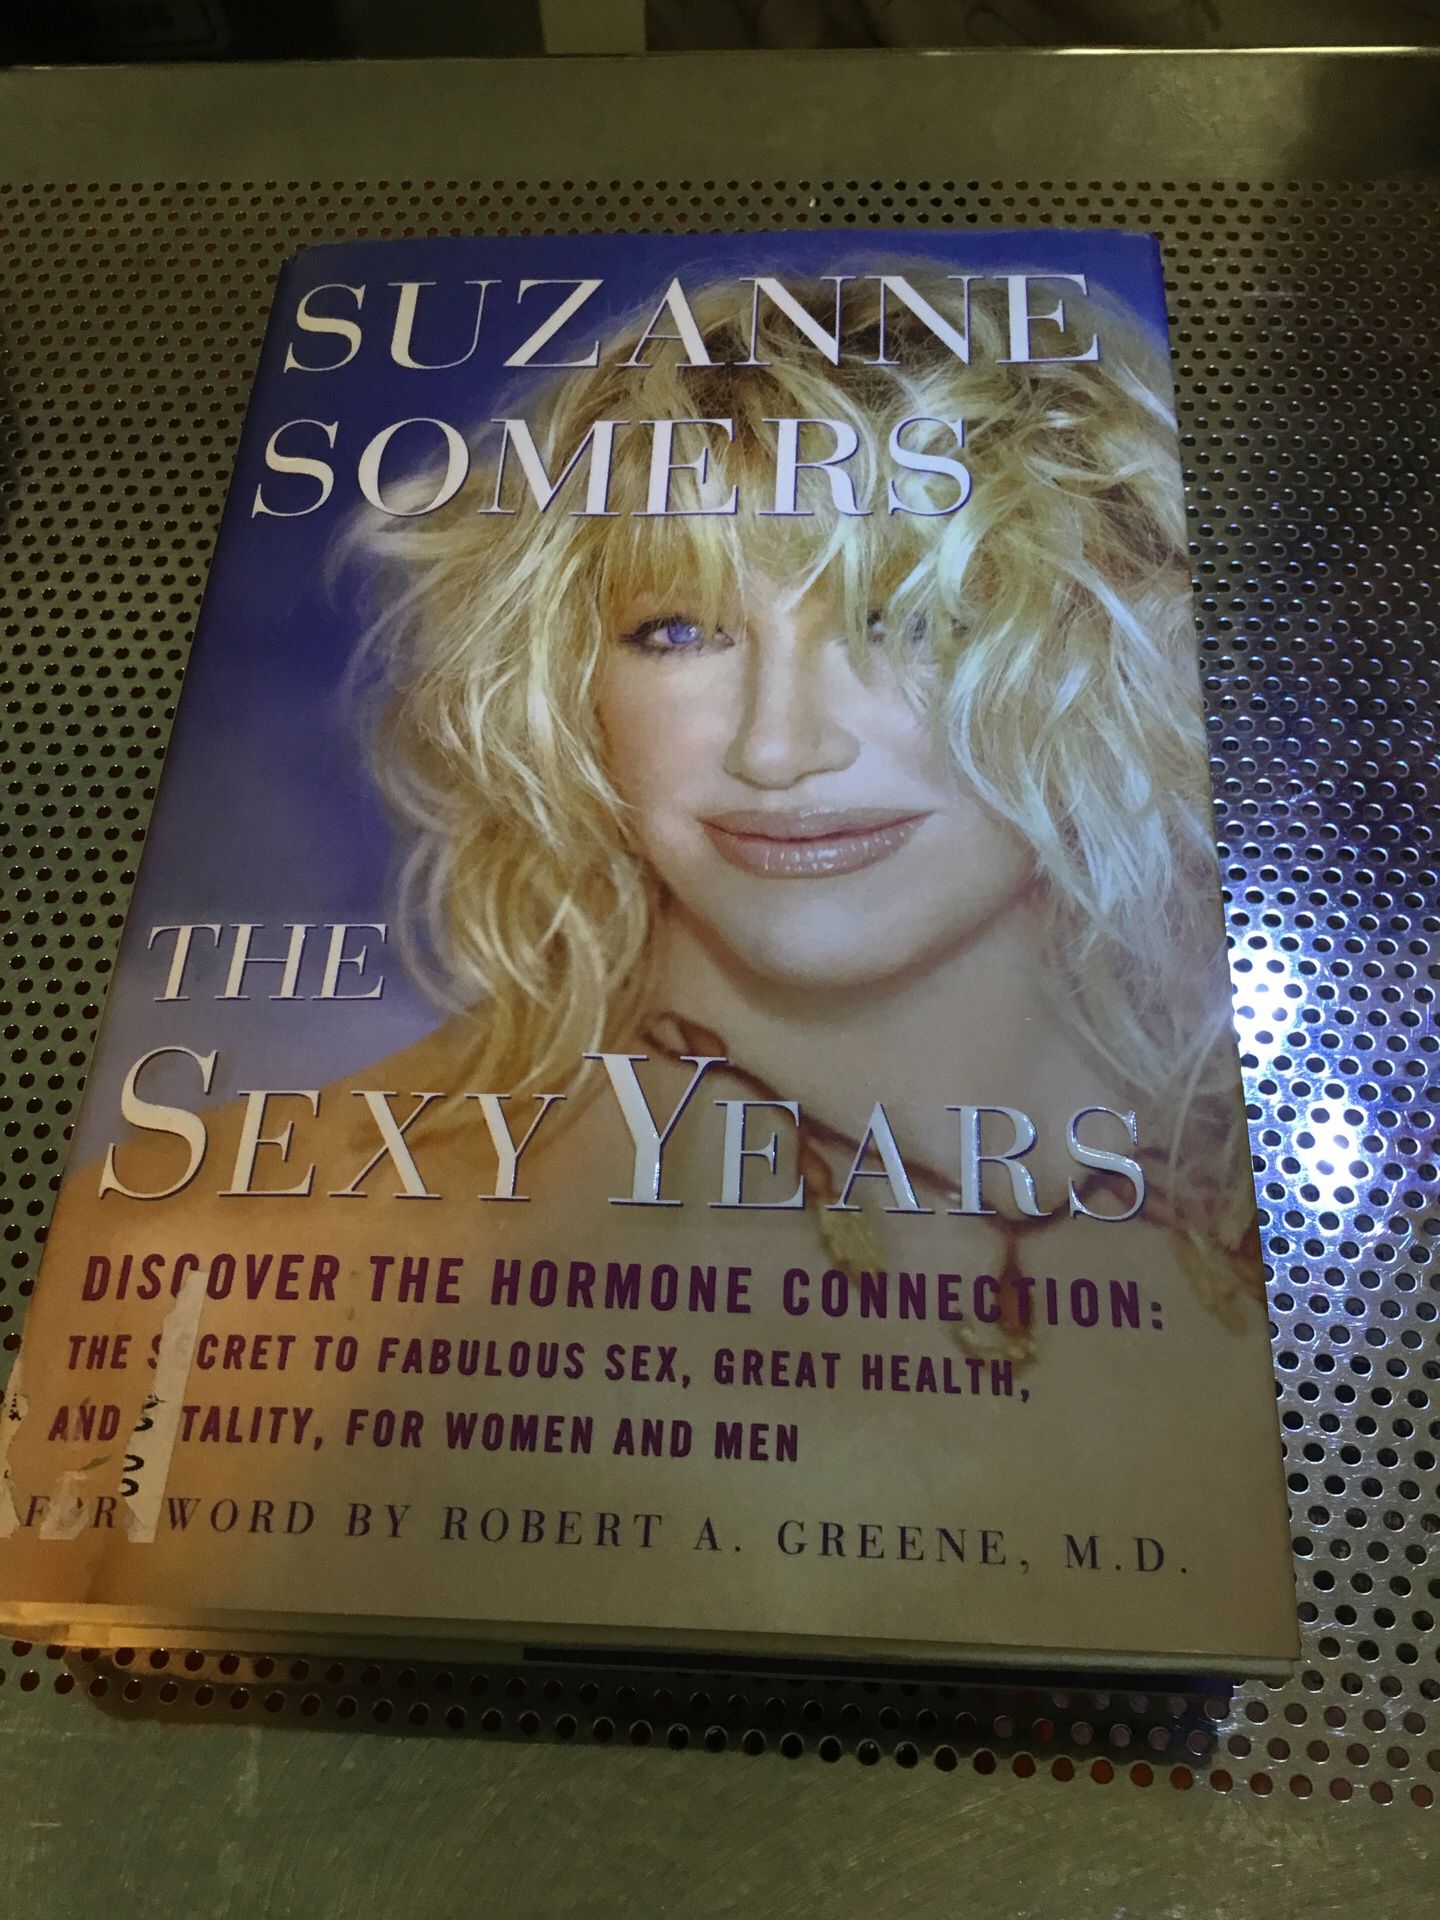 Suzanne Somers The Sexty Years. Hard cover book.